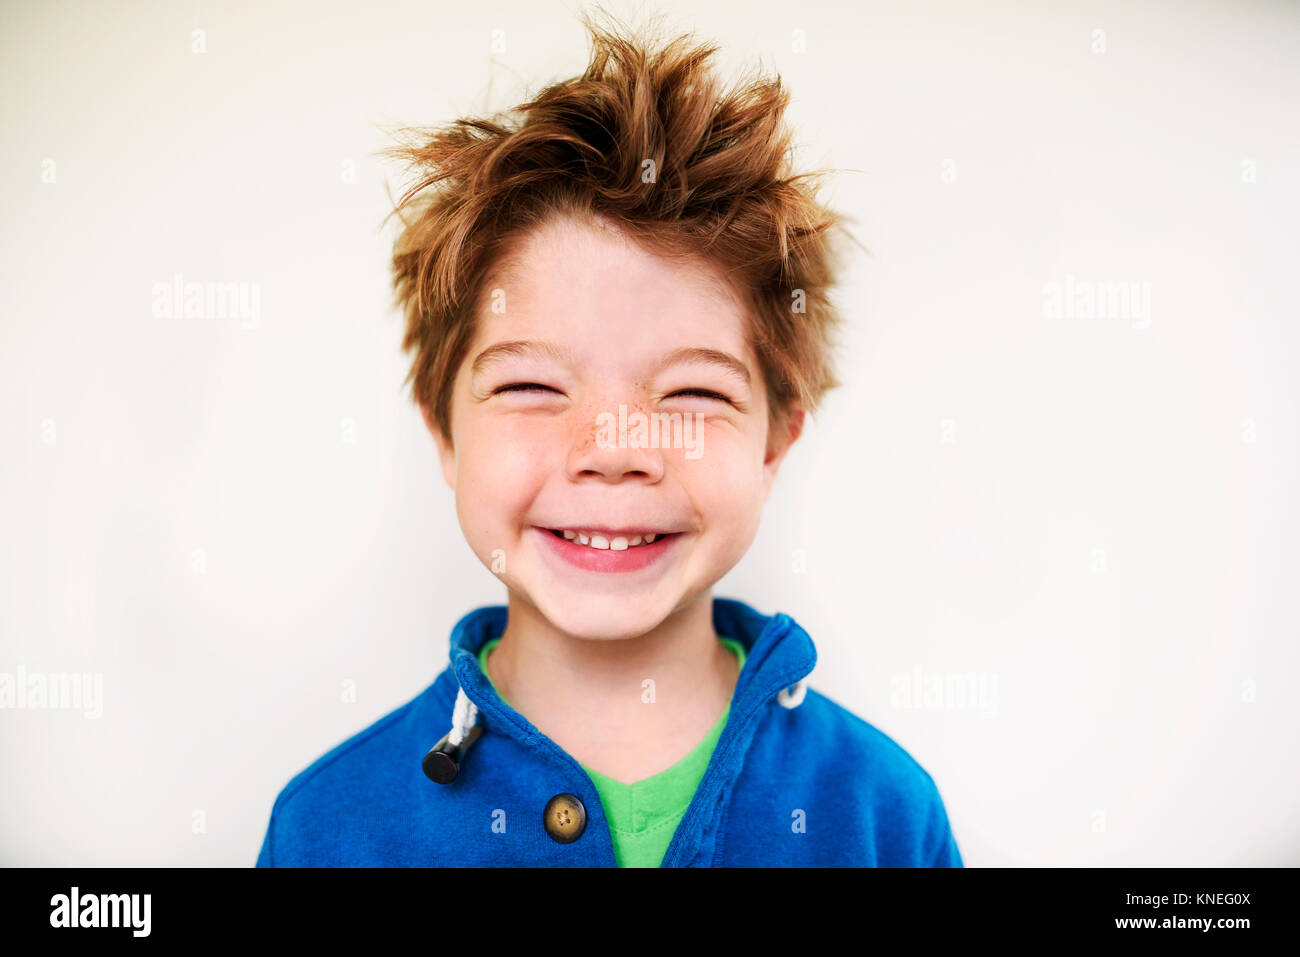 Portrait of a smiling boy with messy hair Stock Photo